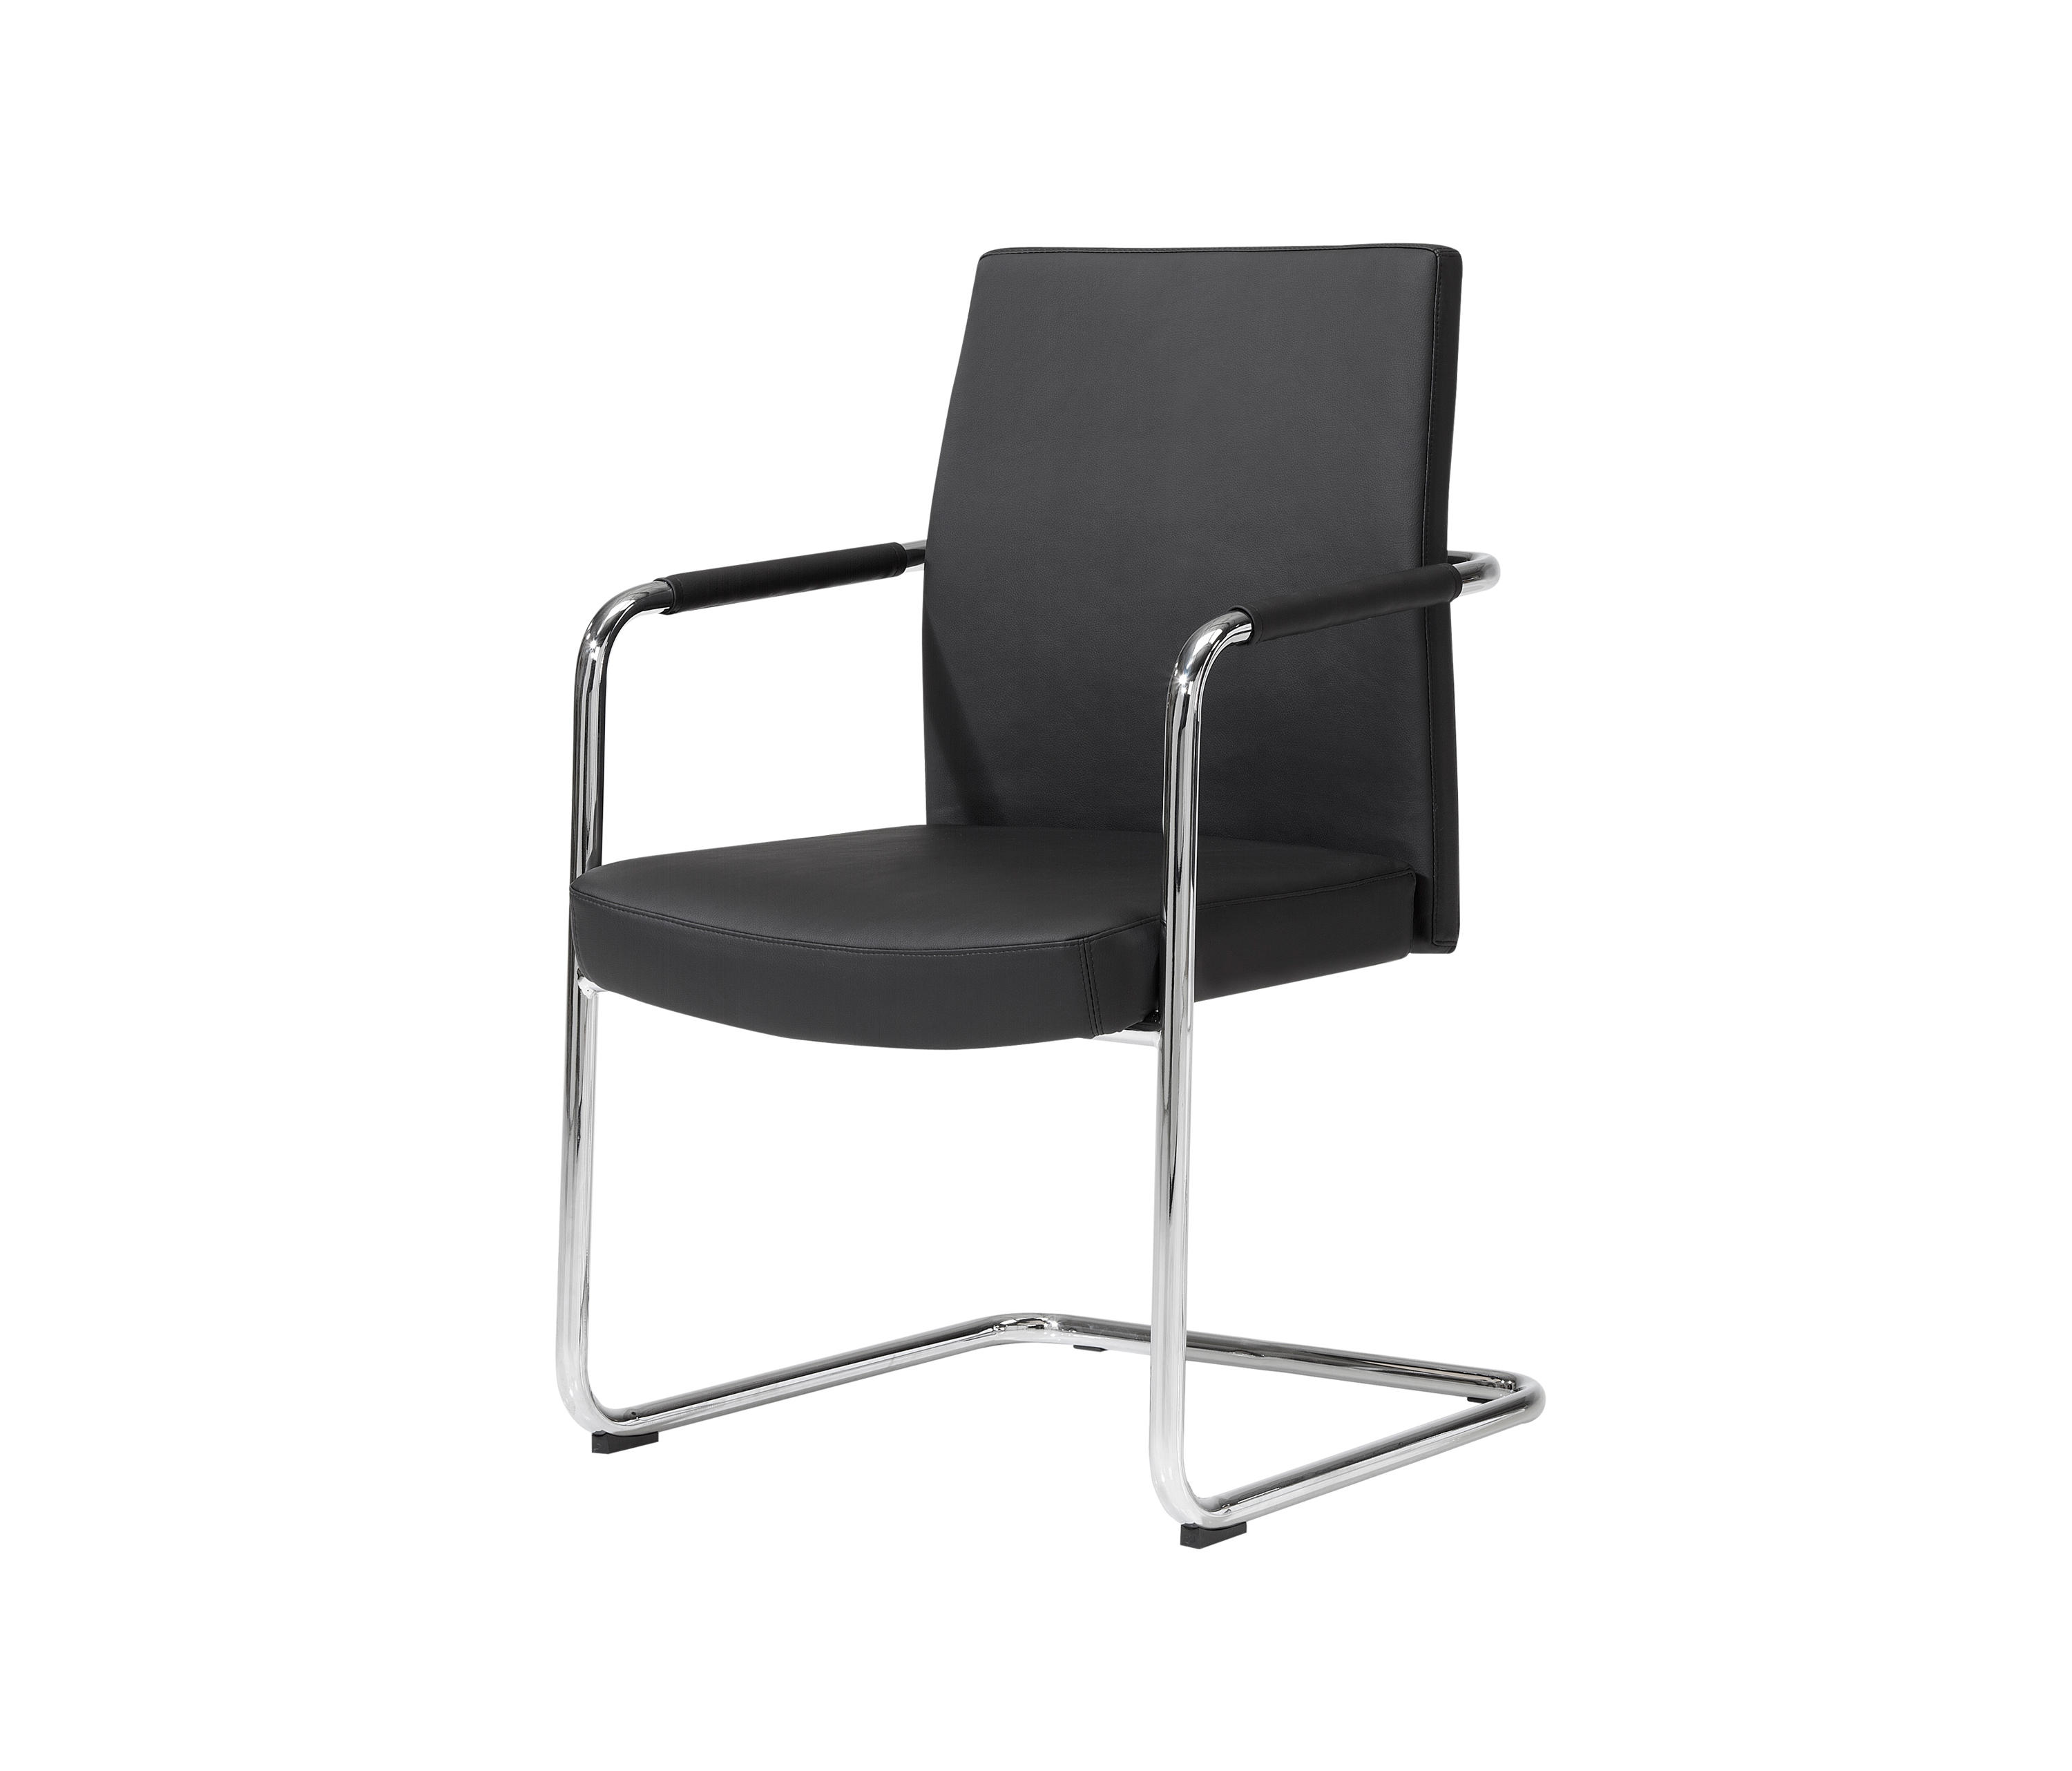 ICON - Chairs from Inclass | Architonic